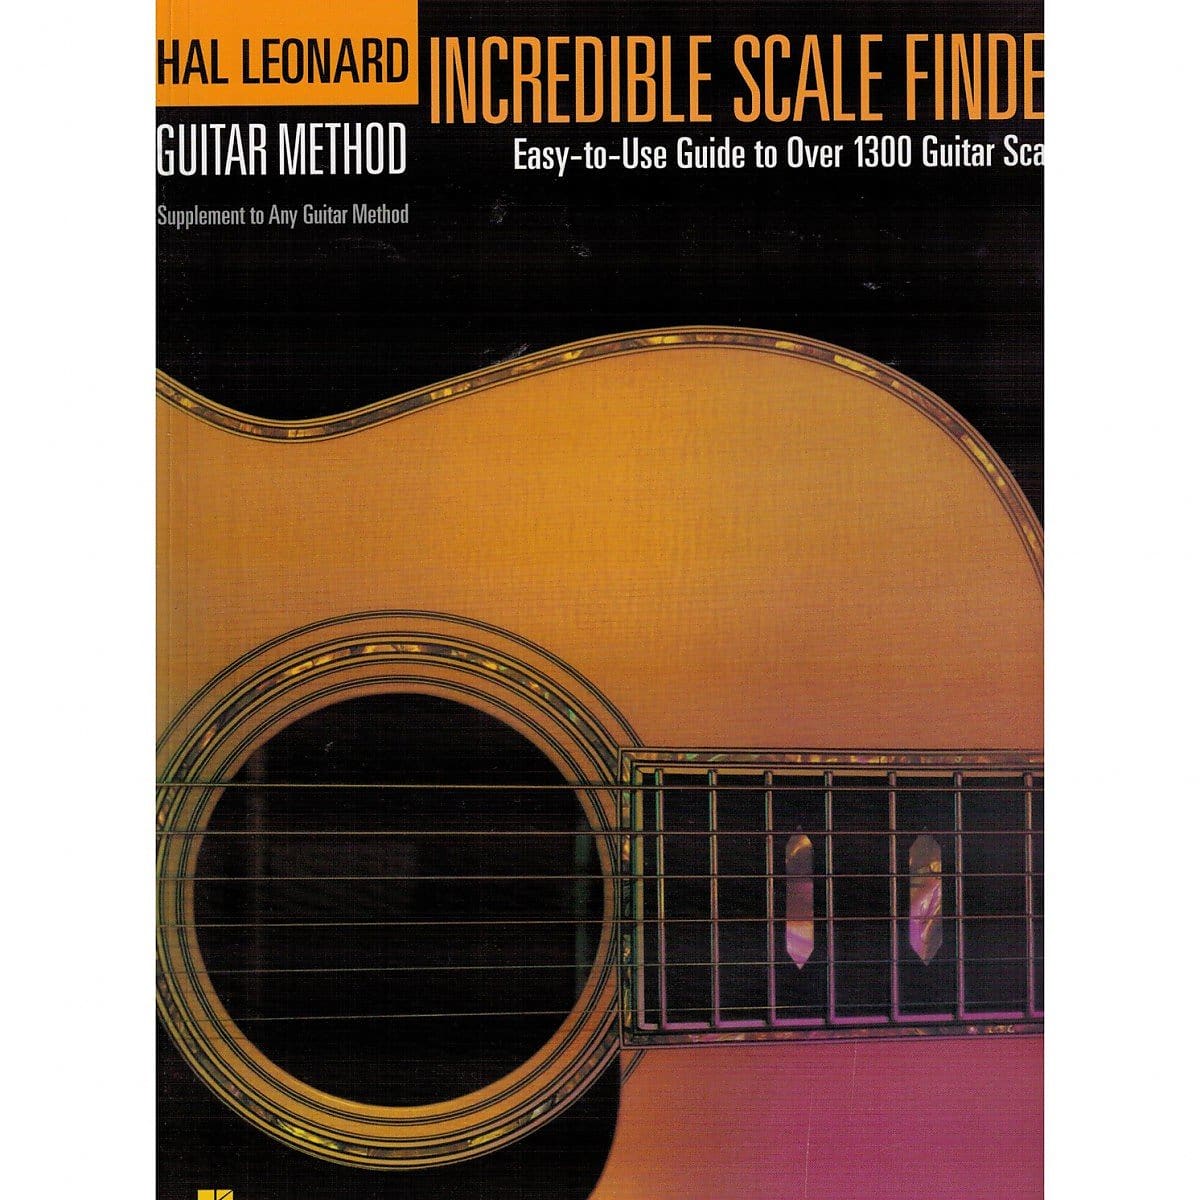 Hal Leonard Incredible Scale Finder A Guide to Over 1,300 Guitar Scales 9 x 12